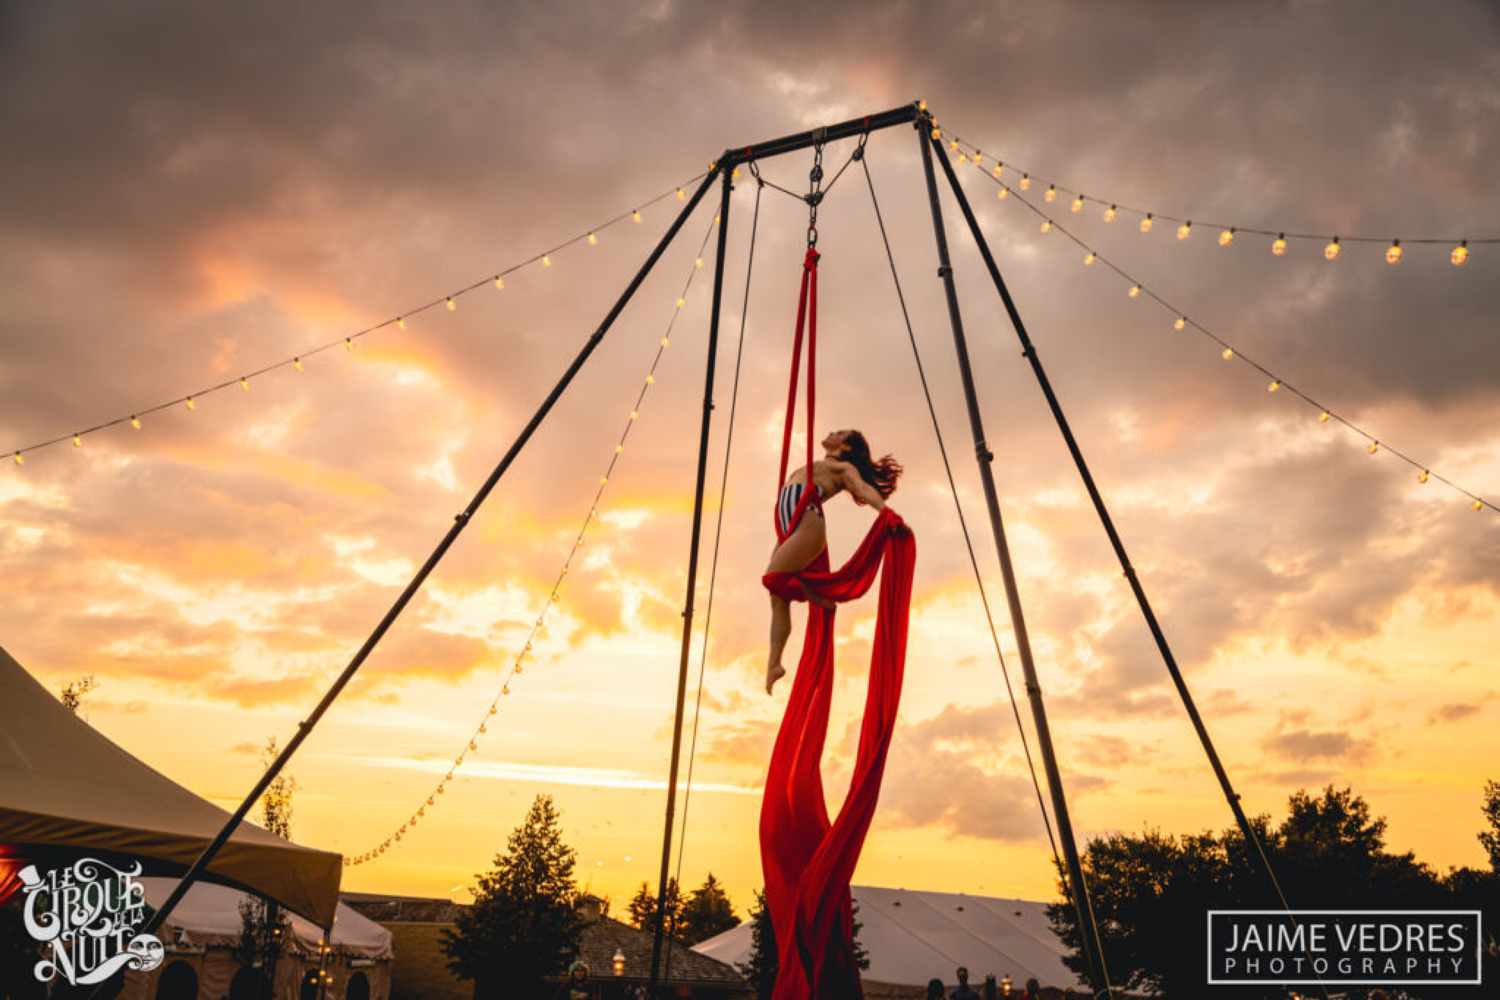 Guests enjoy a fun night out in Calgary while watching performances by Le Cirque de la Nuit at Heritage Park